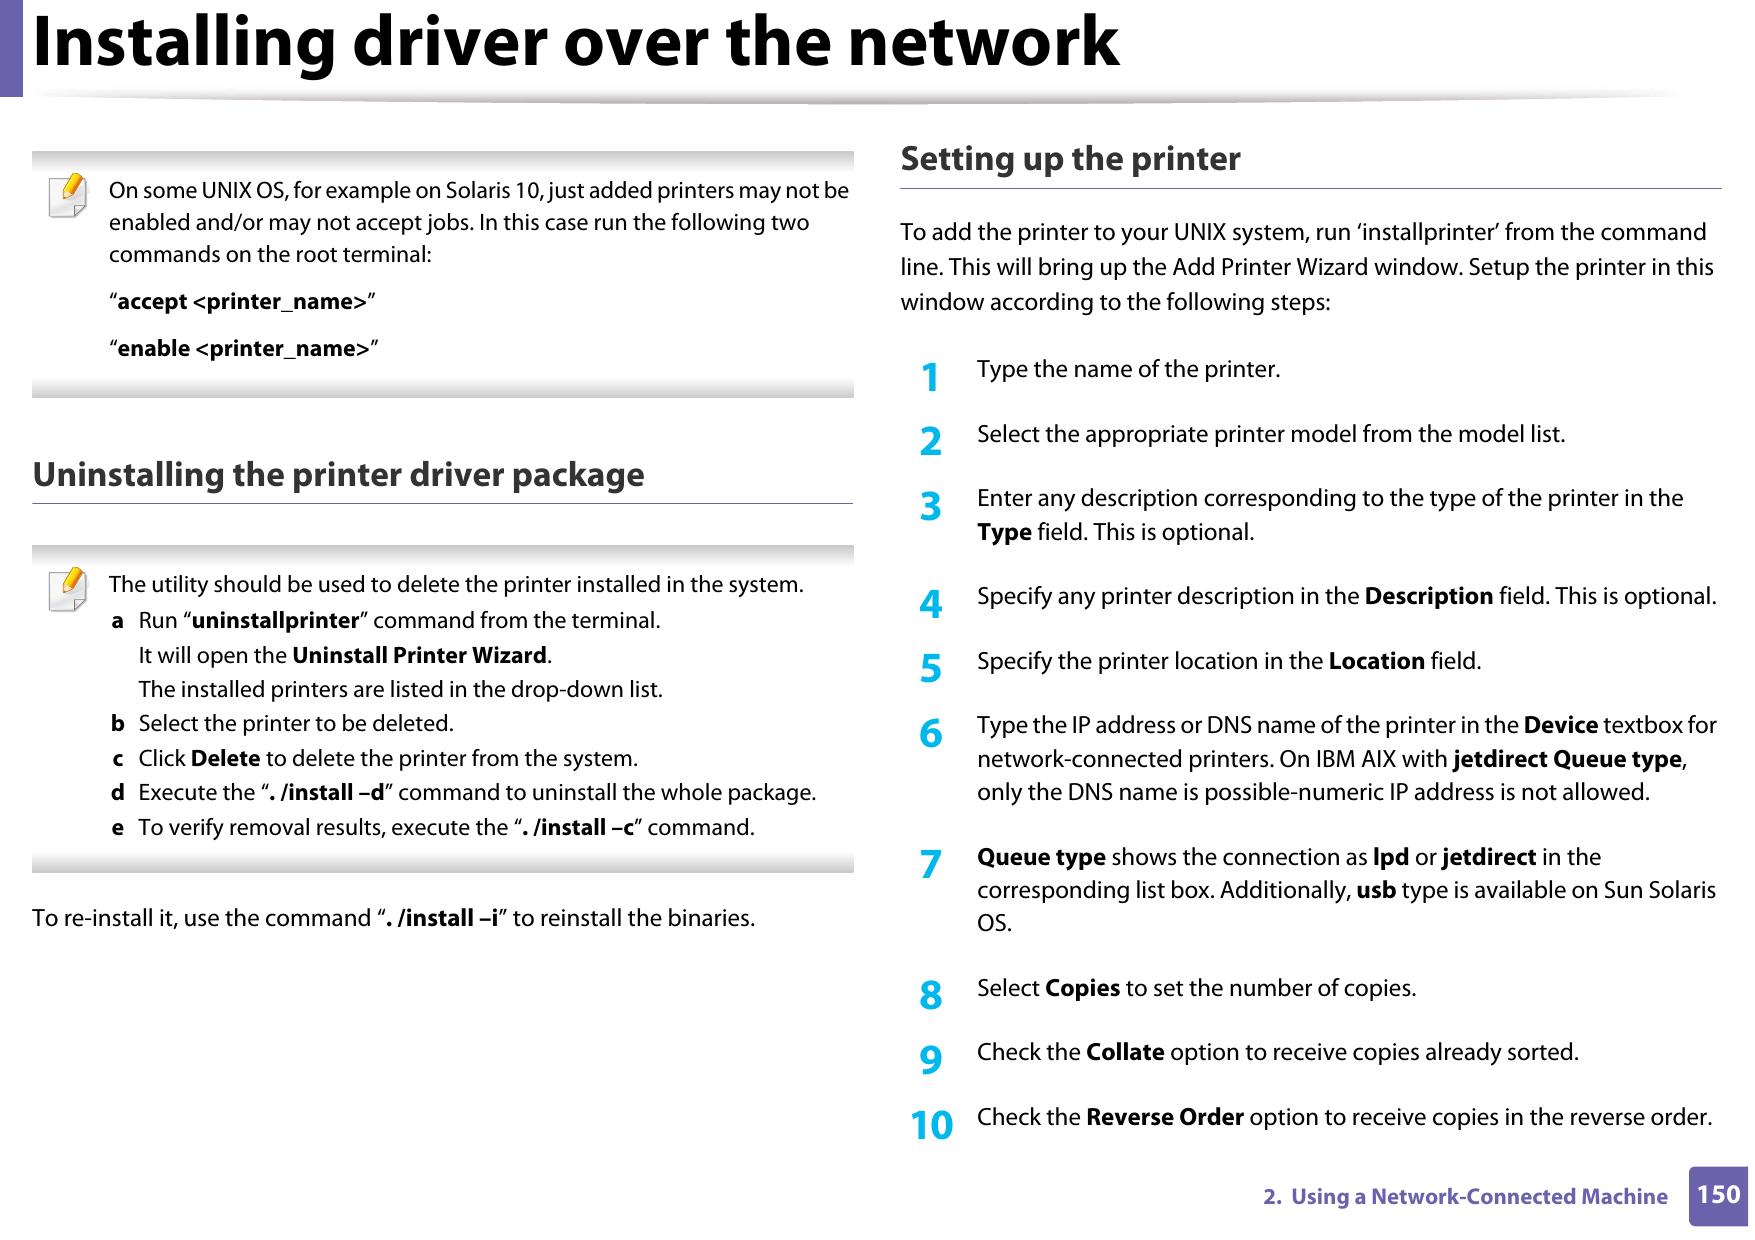 Installing driver over the network1502.  Using a Network-Connected Machine On some UNIX OS, for example on Solaris 10, just added printers may not be enabled and/or may not accept jobs. In this case run the following two commands on the root terminal:“accept &lt;printer_name&gt;”“enable &lt;printer_name&gt;” Uninstalling the printer driver package The utility should be used to delete the printer installed in the system.a  Run “uninstallprinter” command from the terminal.It will open the Uninstall Printer Wizard.The installed printers are listed in the drop-down list.b  Select the printer to be deleted.c  Click Delete to delete the printer from the system.d  Execute the “. /install –d” command to uninstall the whole package.e  To verify removal results, execute the “. /install –c” command. To re-install it, use the command “. /install –i” to reinstall the binaries.Setting up the printerTo add the printer to your UNIX system, run ‘installprinter’ from the command line. This will bring up the Add Printer Wizard window. Setup the printer in this window according to the following steps:1Type the name of the printer.2  Select the appropriate printer model from the model list.3  Enter any description corresponding to the type of the printer in the Type field. This is optional.4  Specify any printer description in the Description field. This is optional.5  Specify the printer location in the Location field.6  Type the IP address or DNS name of the printer in the Device textbox for network-connected printers. On IBM AIX with jetdirect Queue type, only the DNS name is possible-numeric IP address is not allowed.7  Queue type shows the connection as lpd or jetdirect in the corresponding list box. Additionally, usb type is available on Sun Solaris OS.8  Select Copies to set the number of copies.9  Check the Collate option to receive copies already sorted.10  Check the Reverse Order option to receive copies in the reverse order.